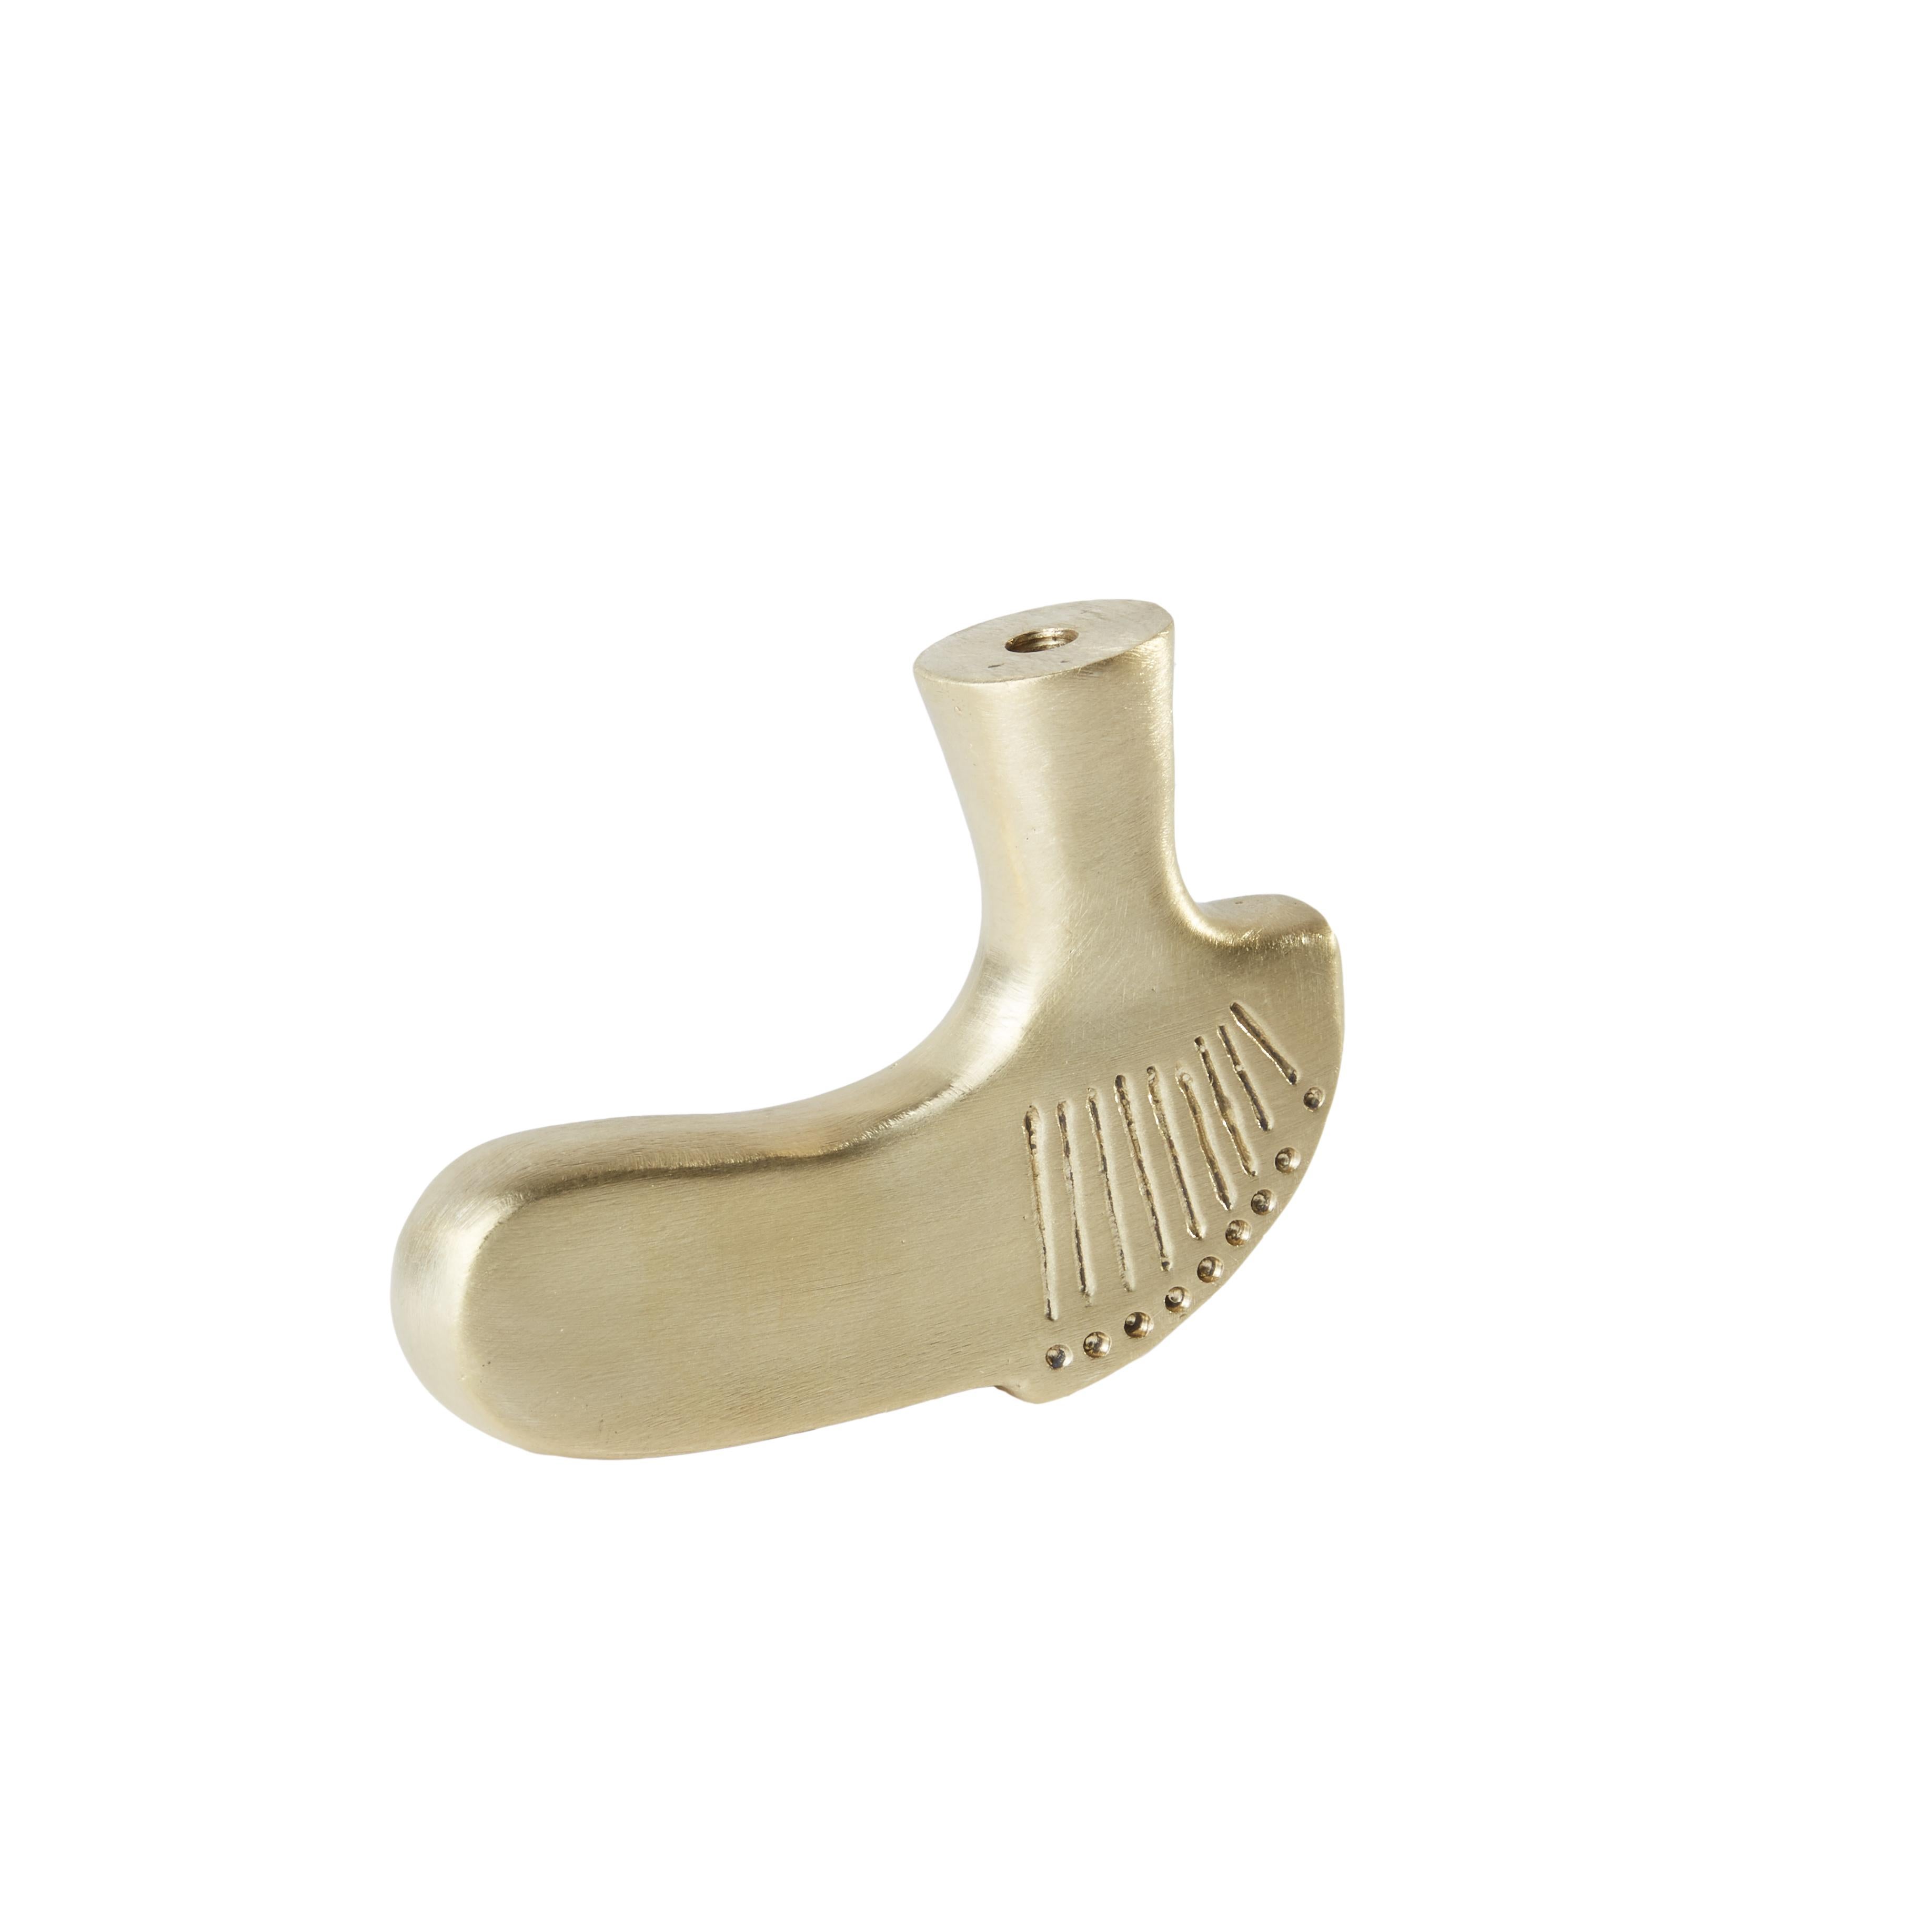 NIVA design presents an original collection of knobs inspired by nature.
Every knob is a unique piece, a sort of jewel made with the lost wax casting technique.
The door handles and knobs are made by brass lost-wax casting.
NIVA design offers an